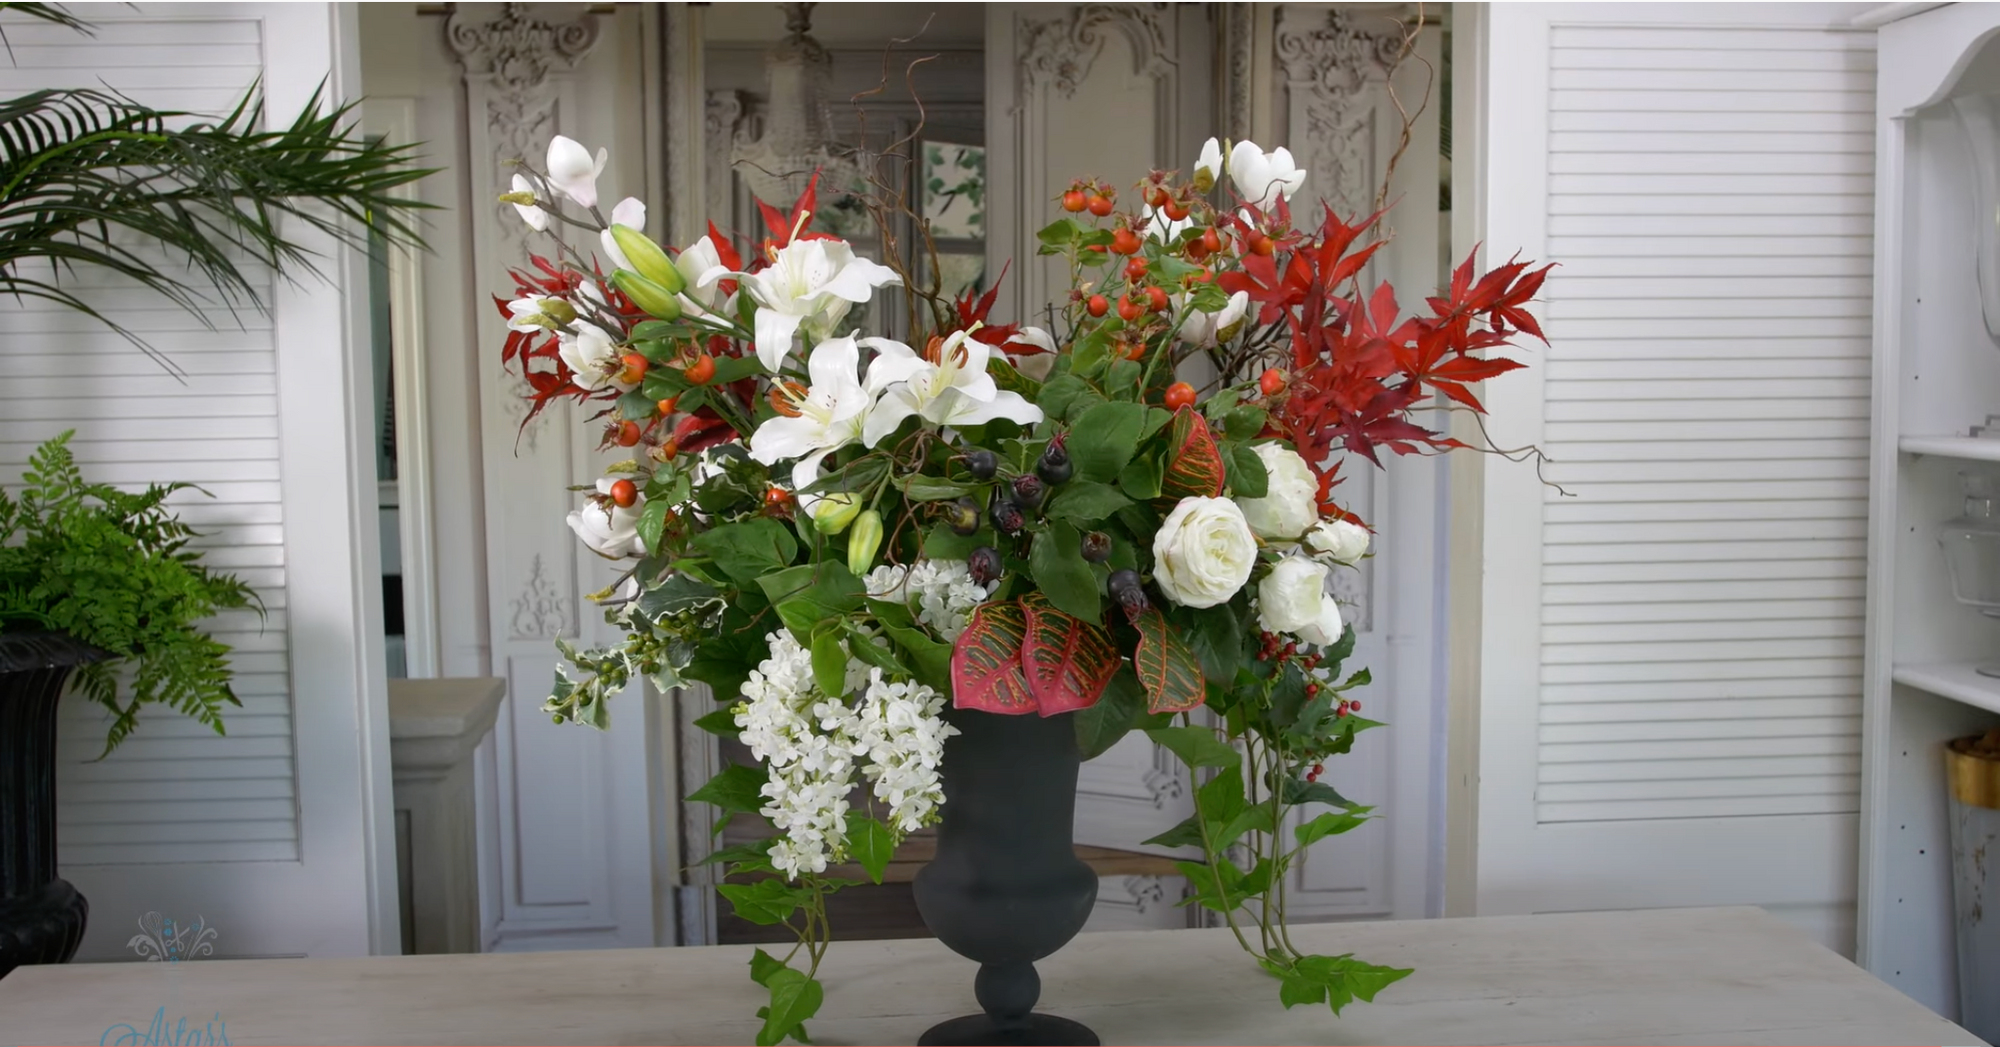 A Divine Traditional Christmas Red & White Arrangement!